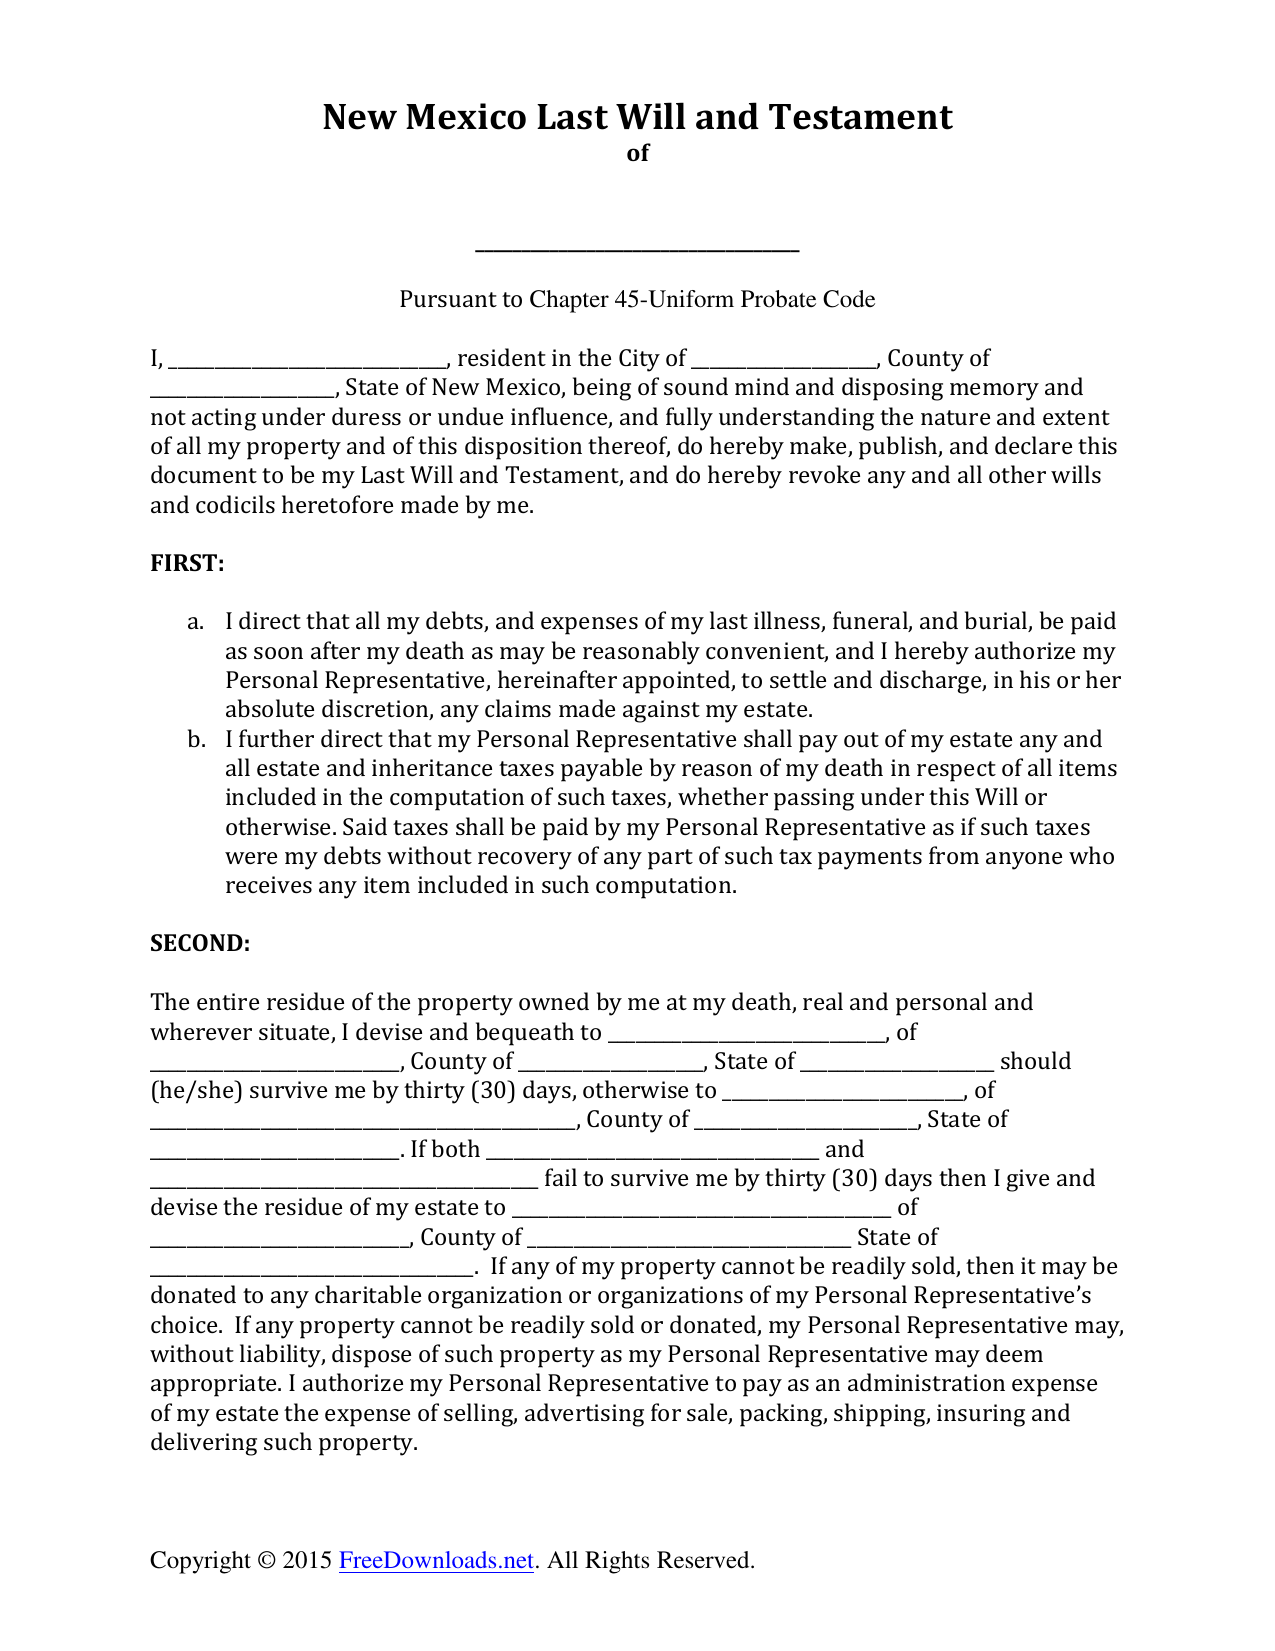 Download New Mexico Last Will and Testament Form PDF RTF Word